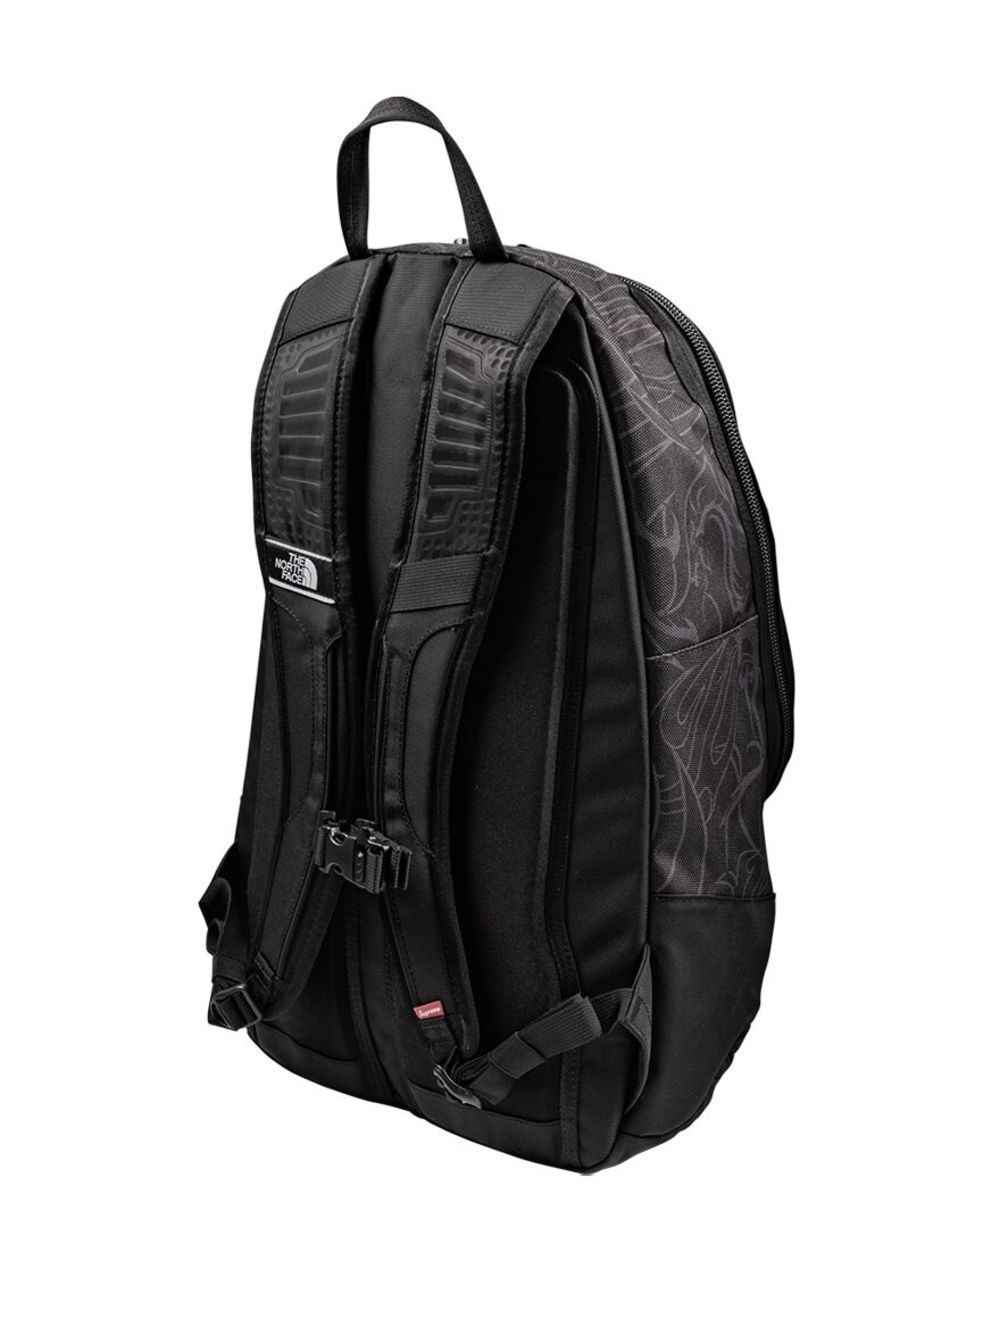 x The North Face Steep Tech backpack - 2